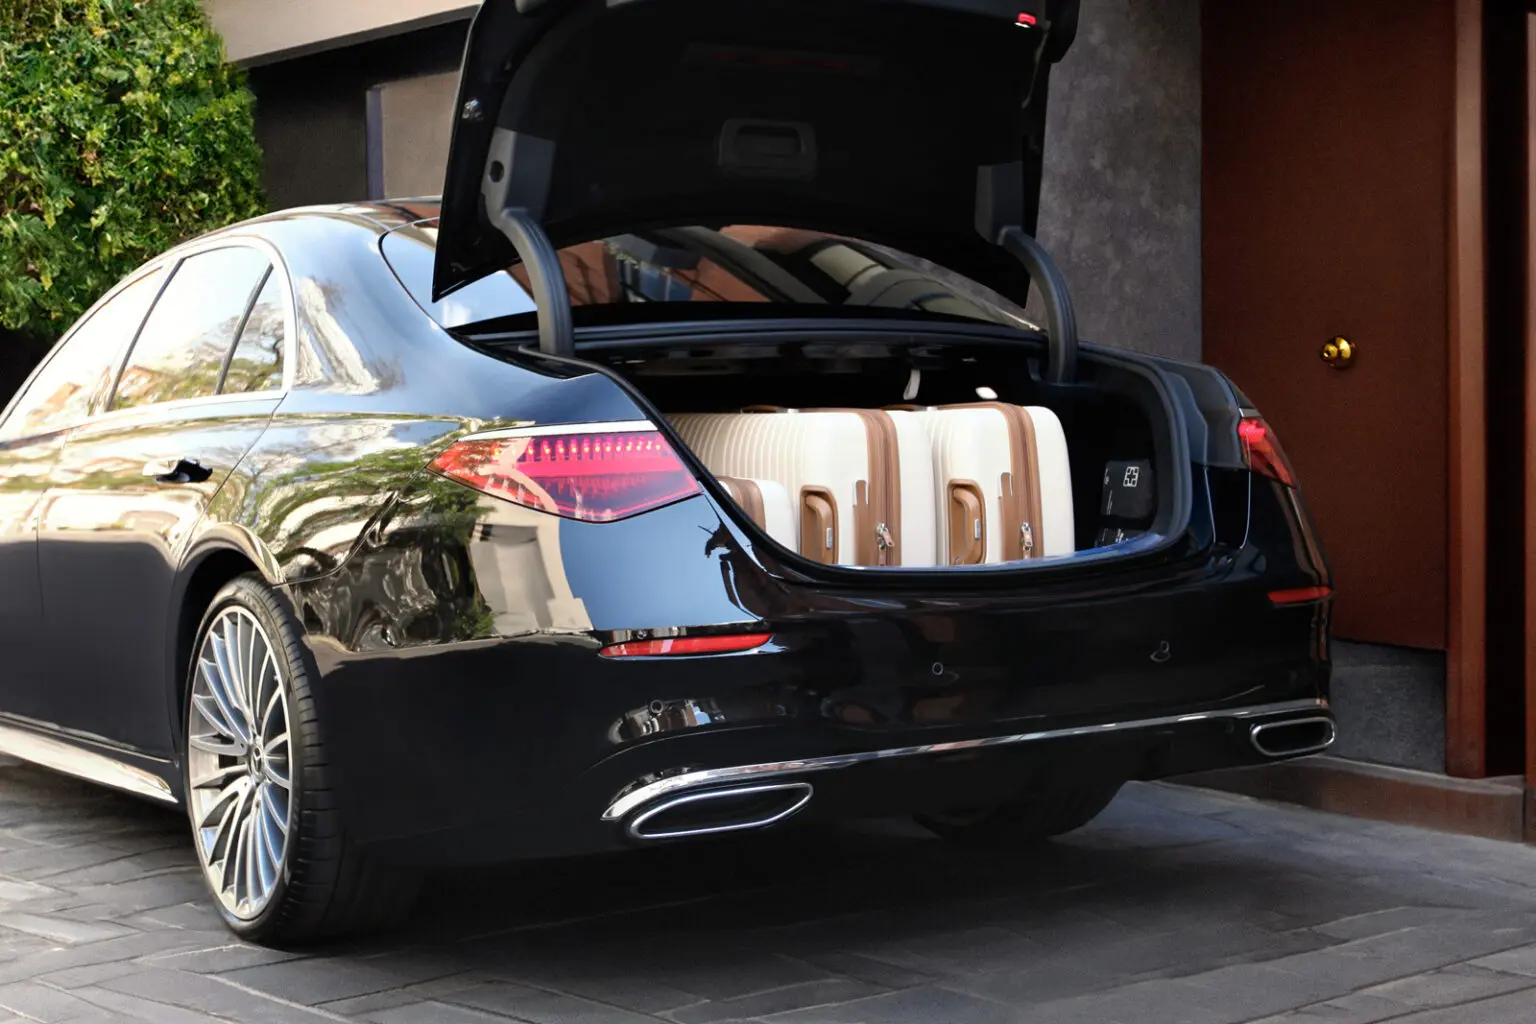 mercedes-s-class-chauffeur-car-with-luggage-1536x1024